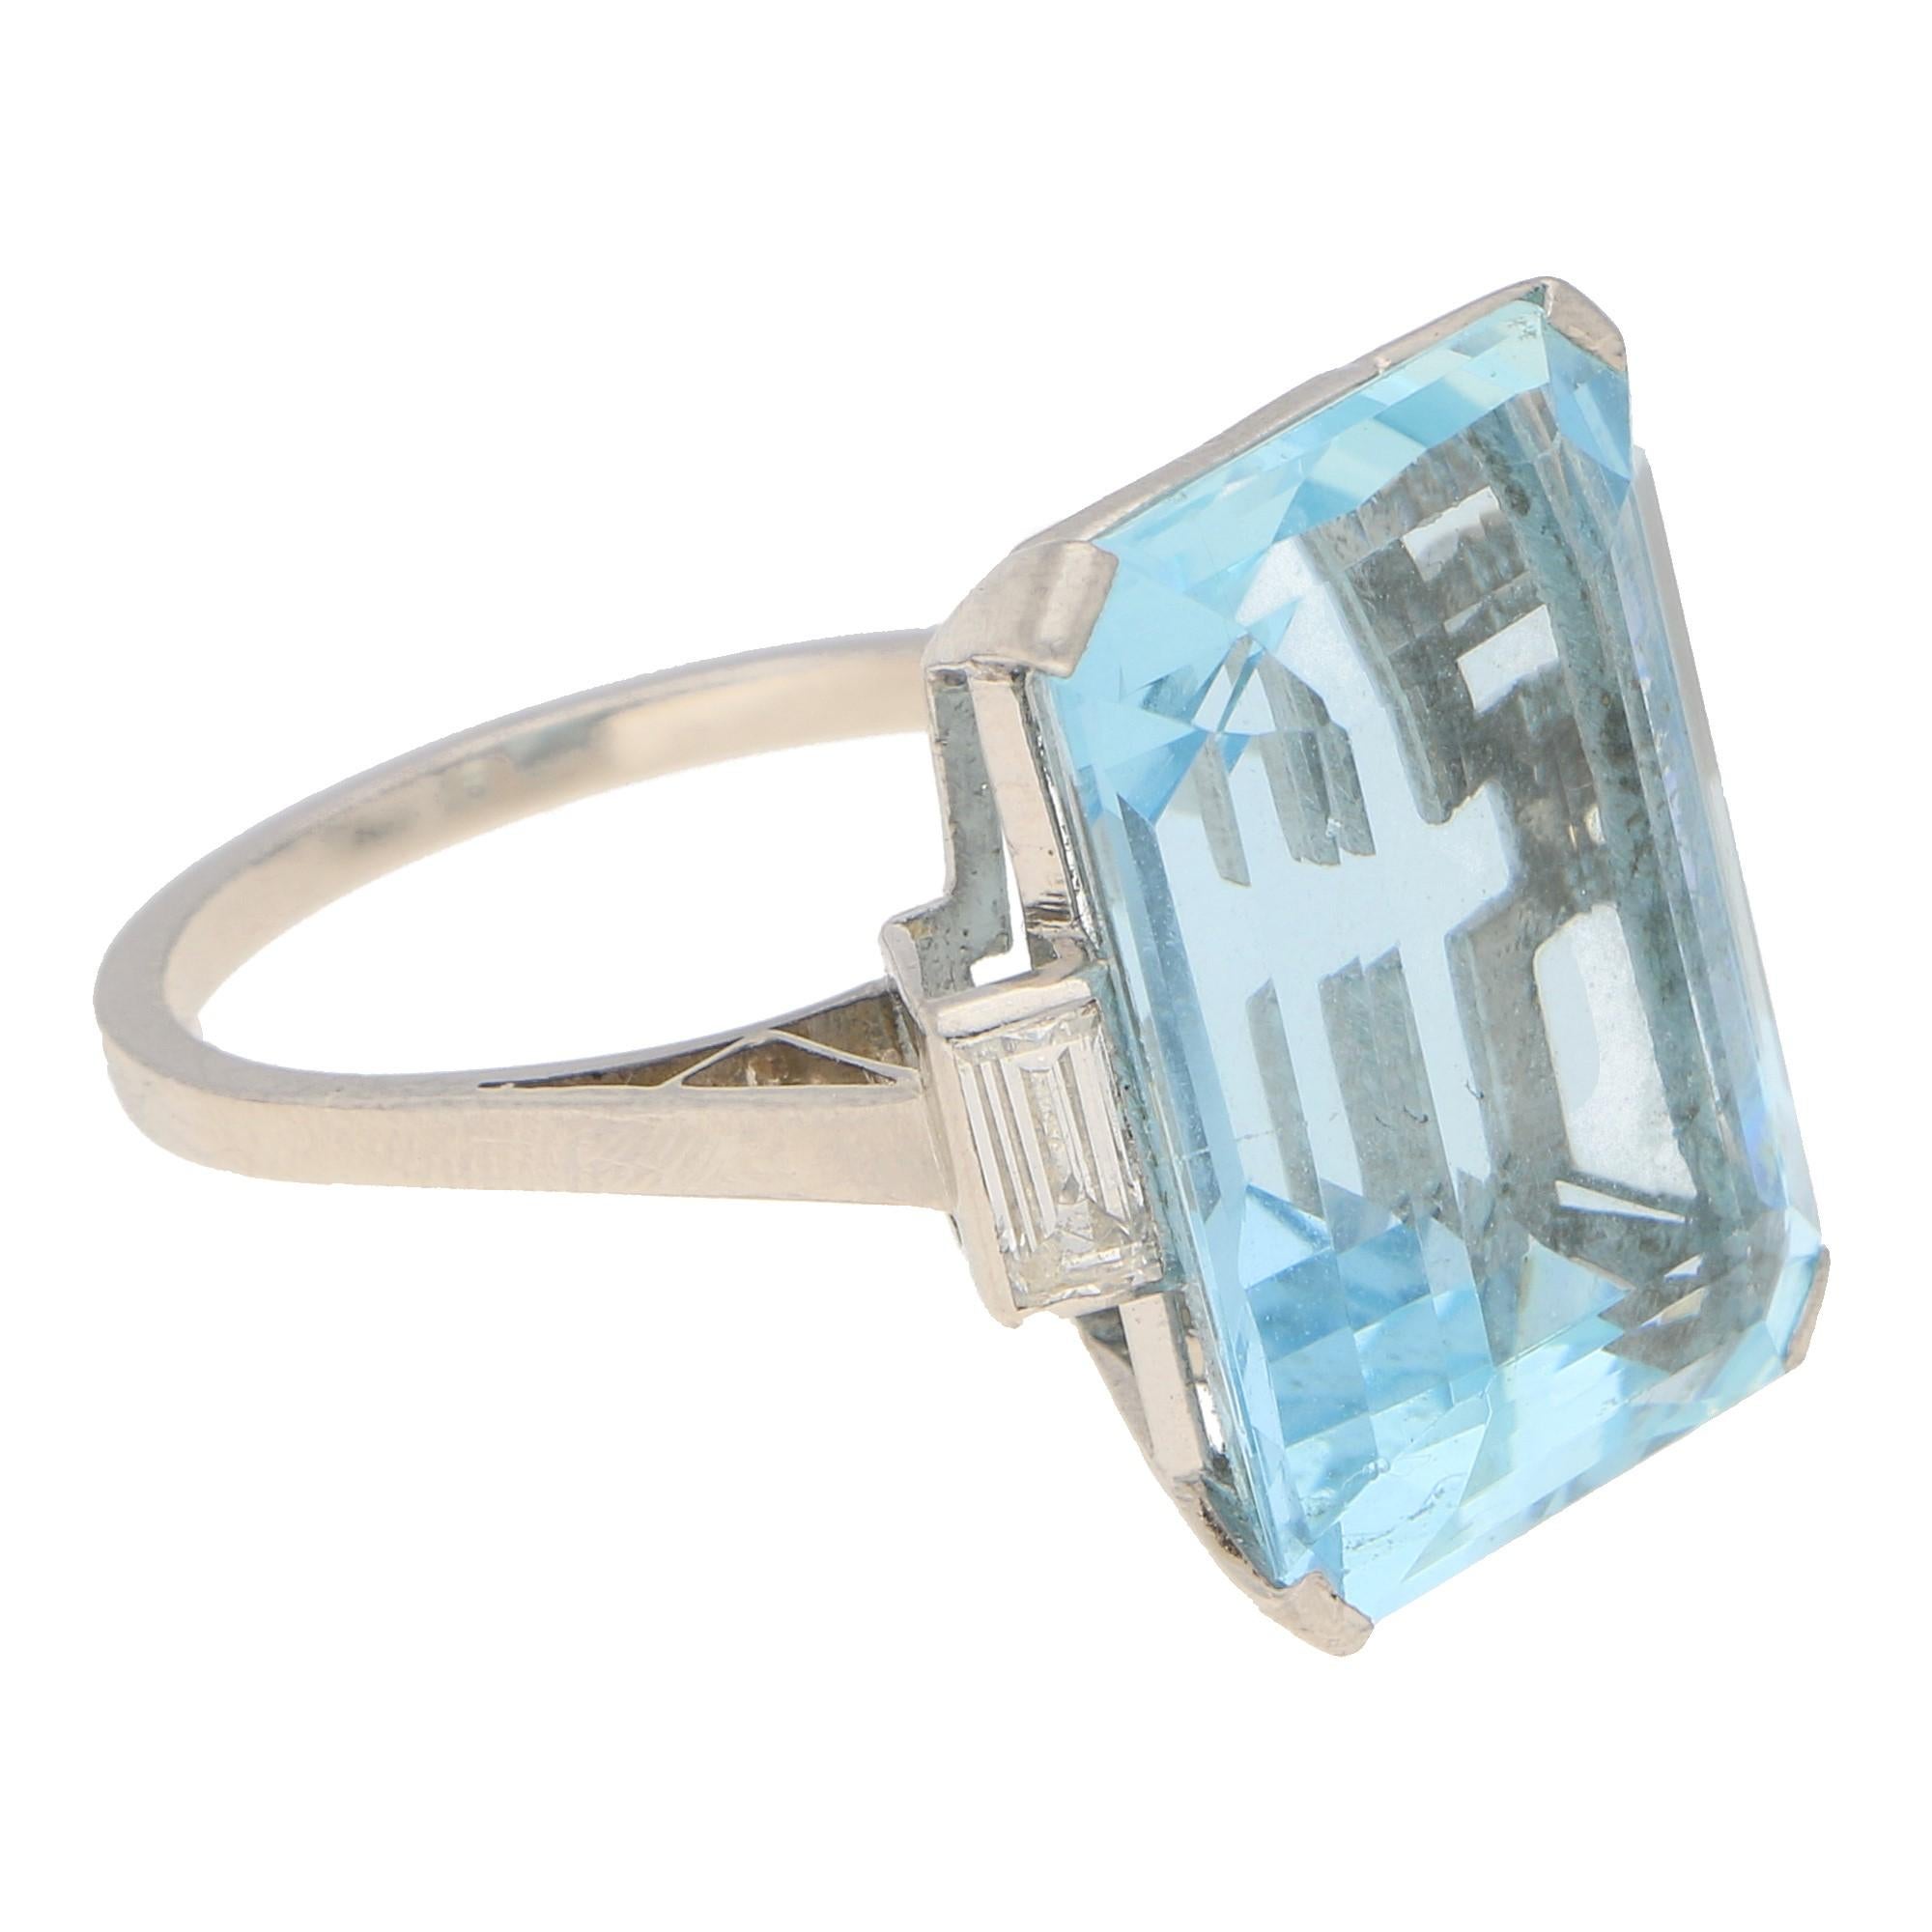 Aquamarine approximately 17 carats. Diamonds approximately 0.40 carats, G/H colour, SI clarity.
An Art Deco aquamarine and diamond cocktail ring in platinum featuring a large emerald-cut aquamarine four-claw-set to the centre, flanked to each side